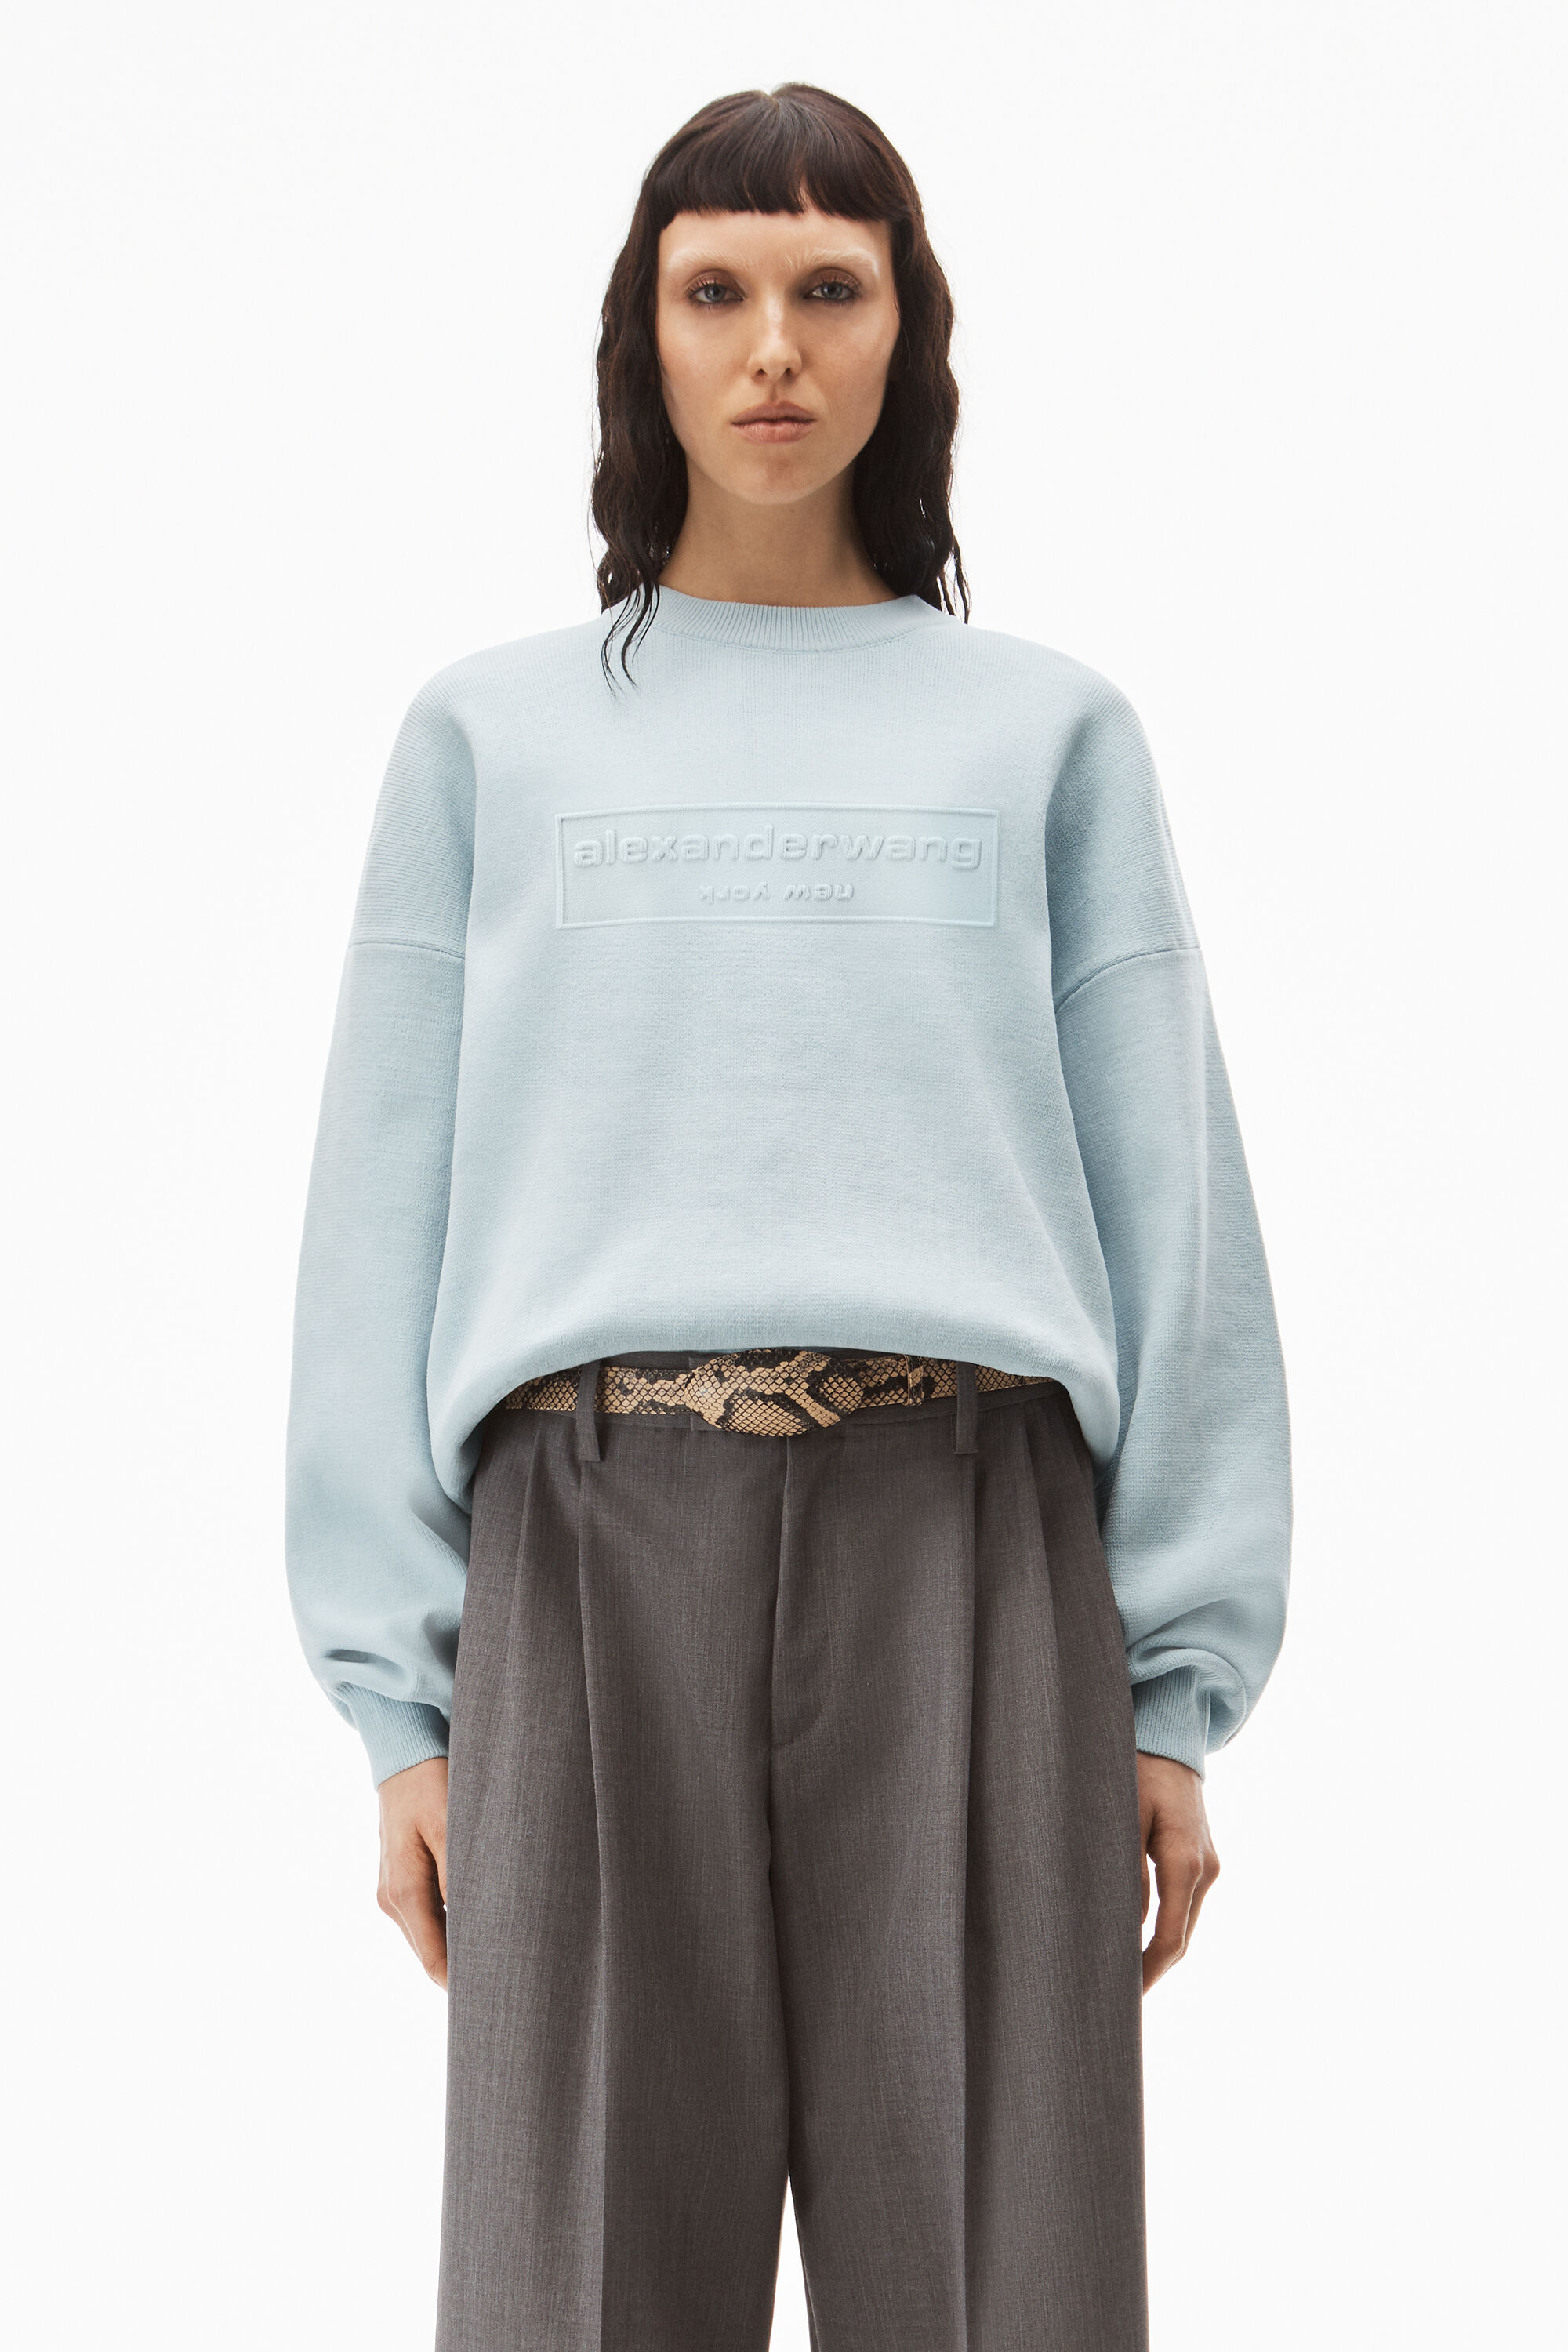 alexanderwang PULLOVER SWEATER IN RIBBED CHENILLE 